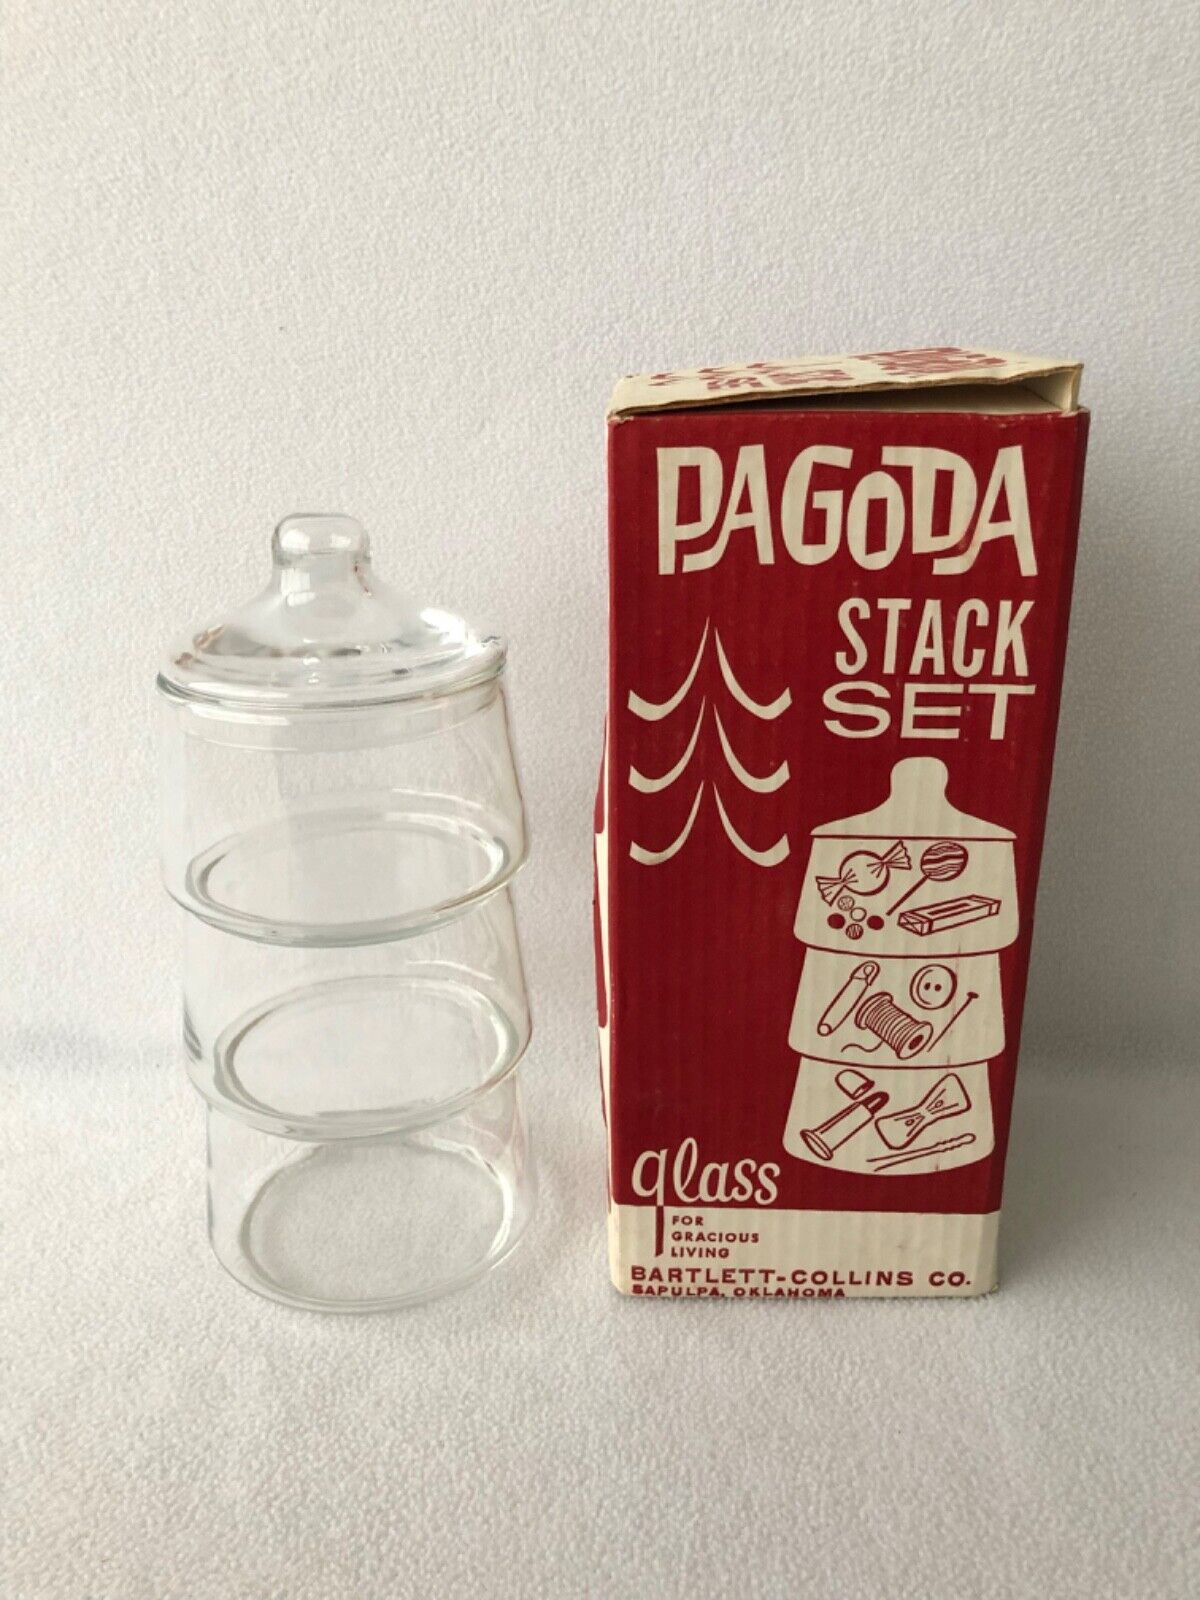 Vintage Bartlett Collins Clear Glass Pagoda Stack Set Candy Nuts Snacks NOS